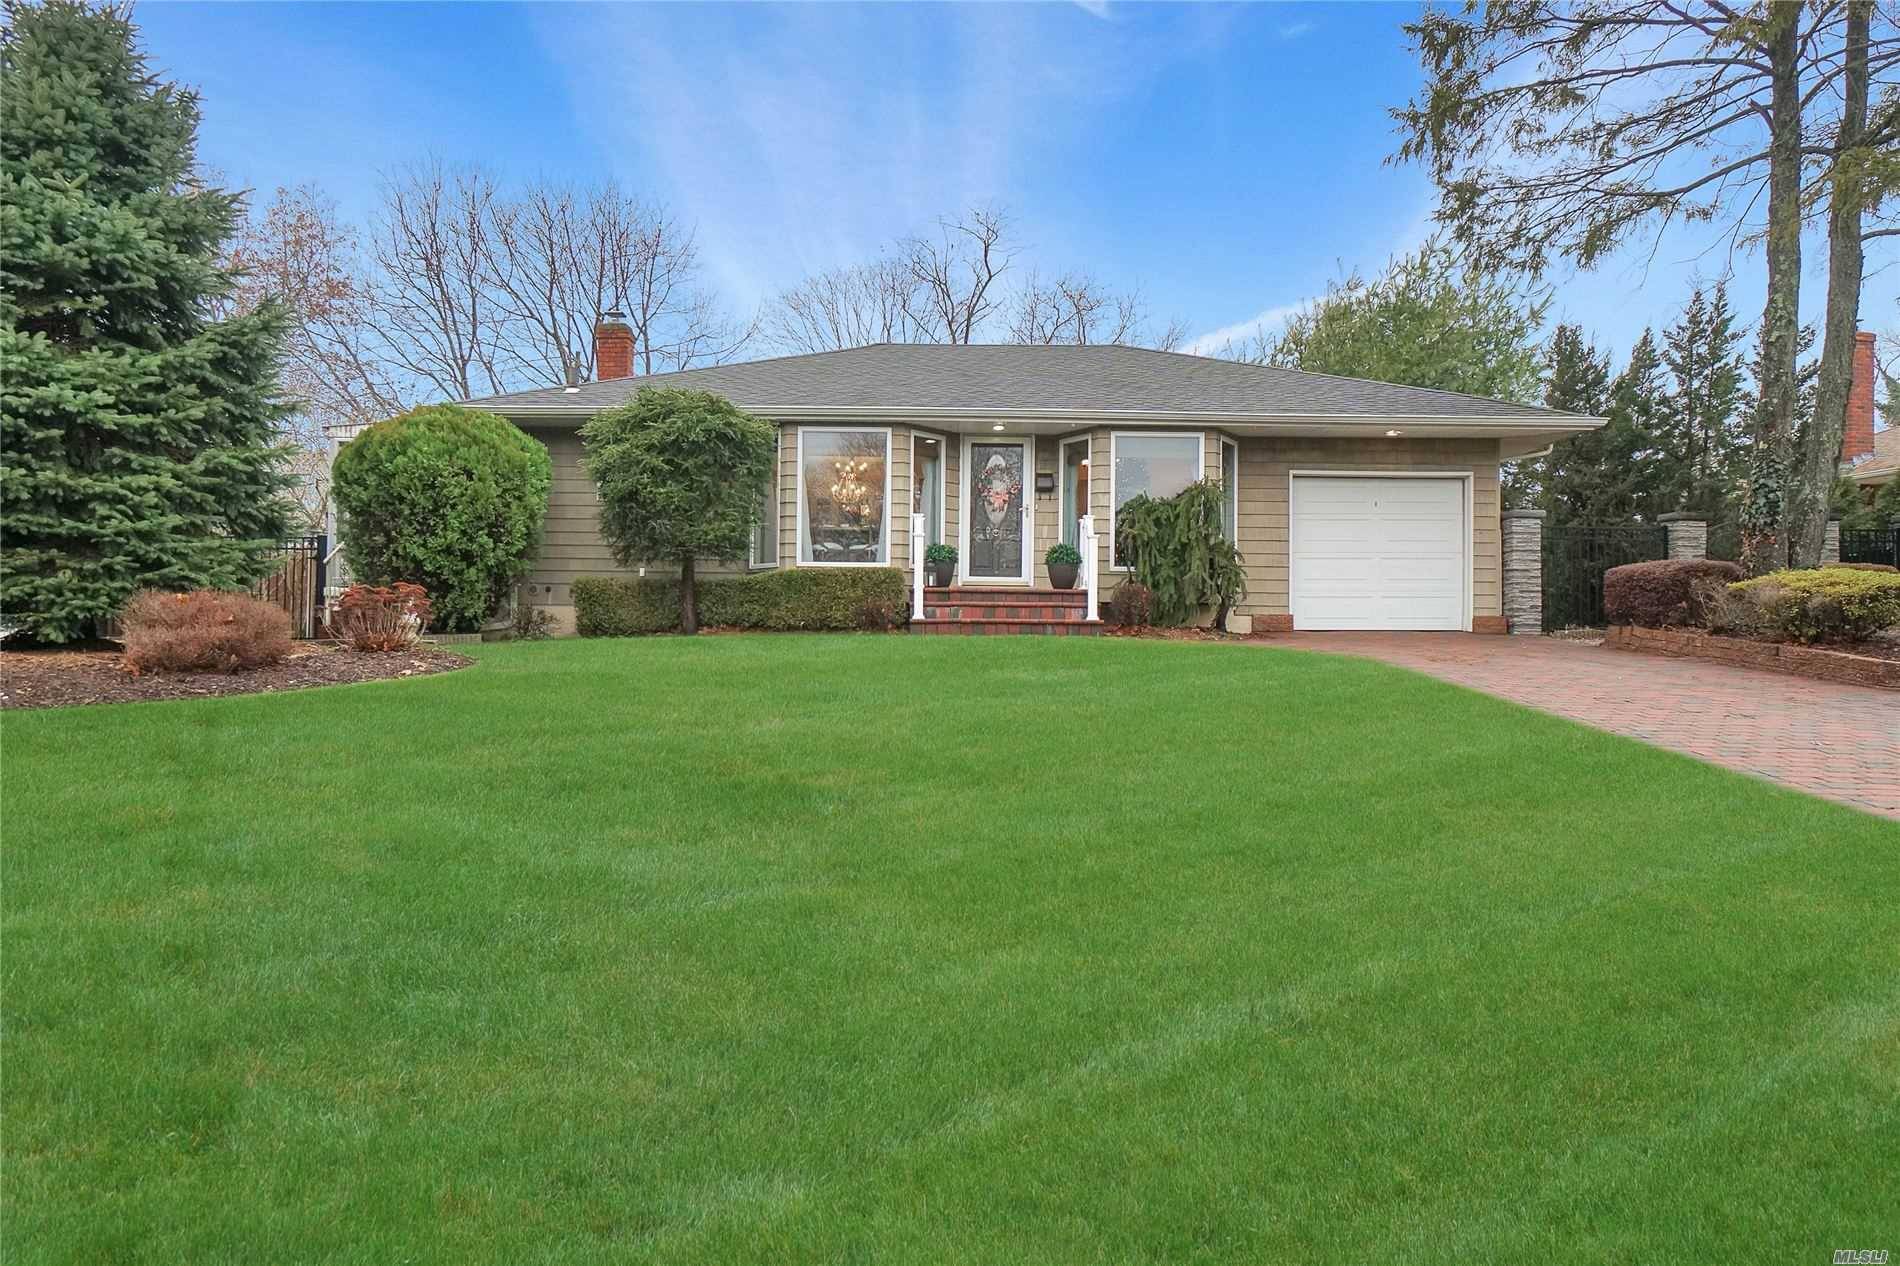 Welcome Home to this Diamond Ranch with Beautiful Curb Appeal in the Desirable College Section of East Hill Estates within the Smithtown SD.